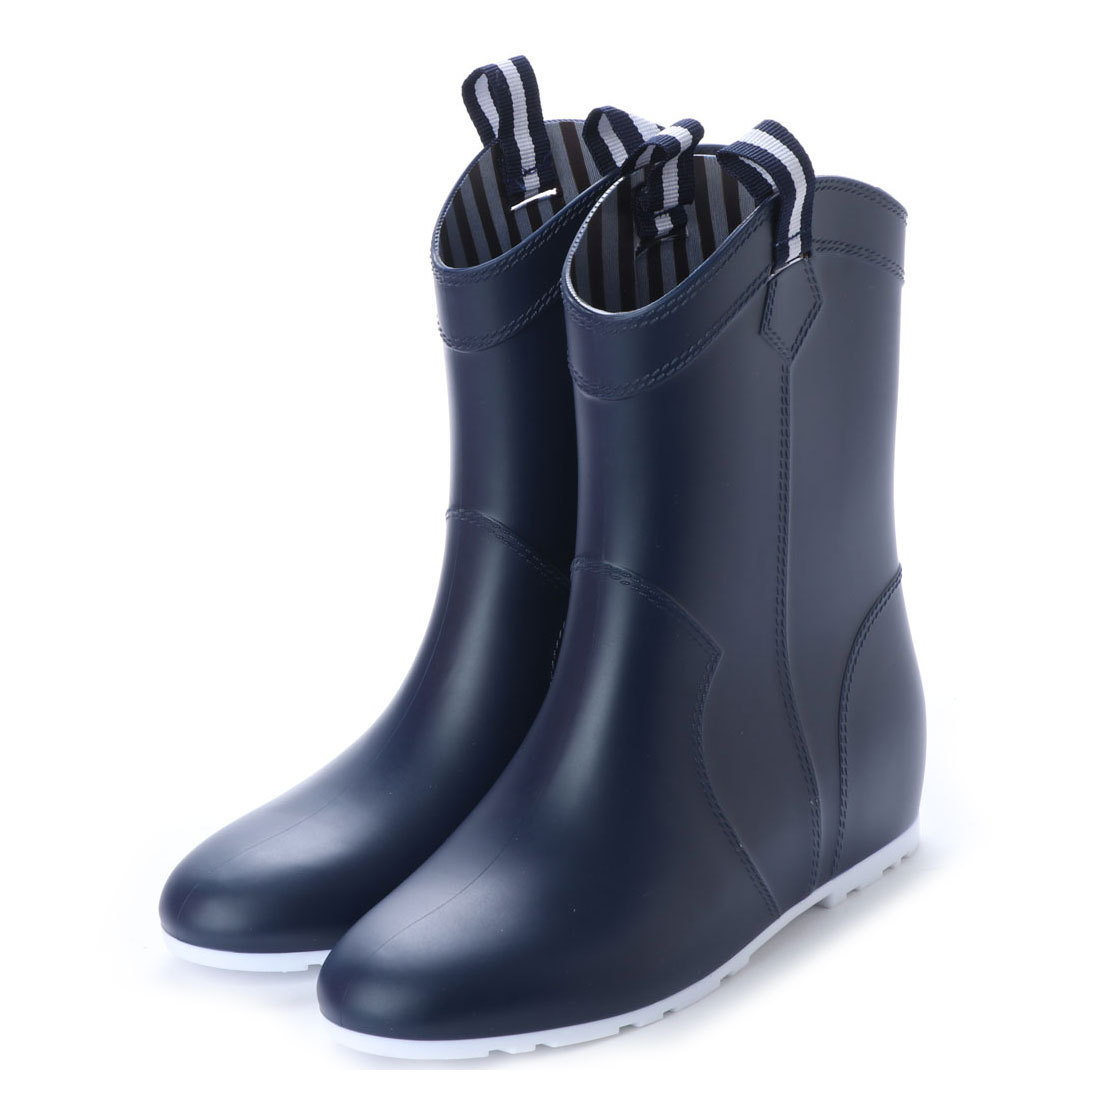  new goods [18034-NAV-LL]LL size 24.5cm~25.0cm lady's middle height rain boots, rain shoes, boots, Secret boots, stock one . sale 